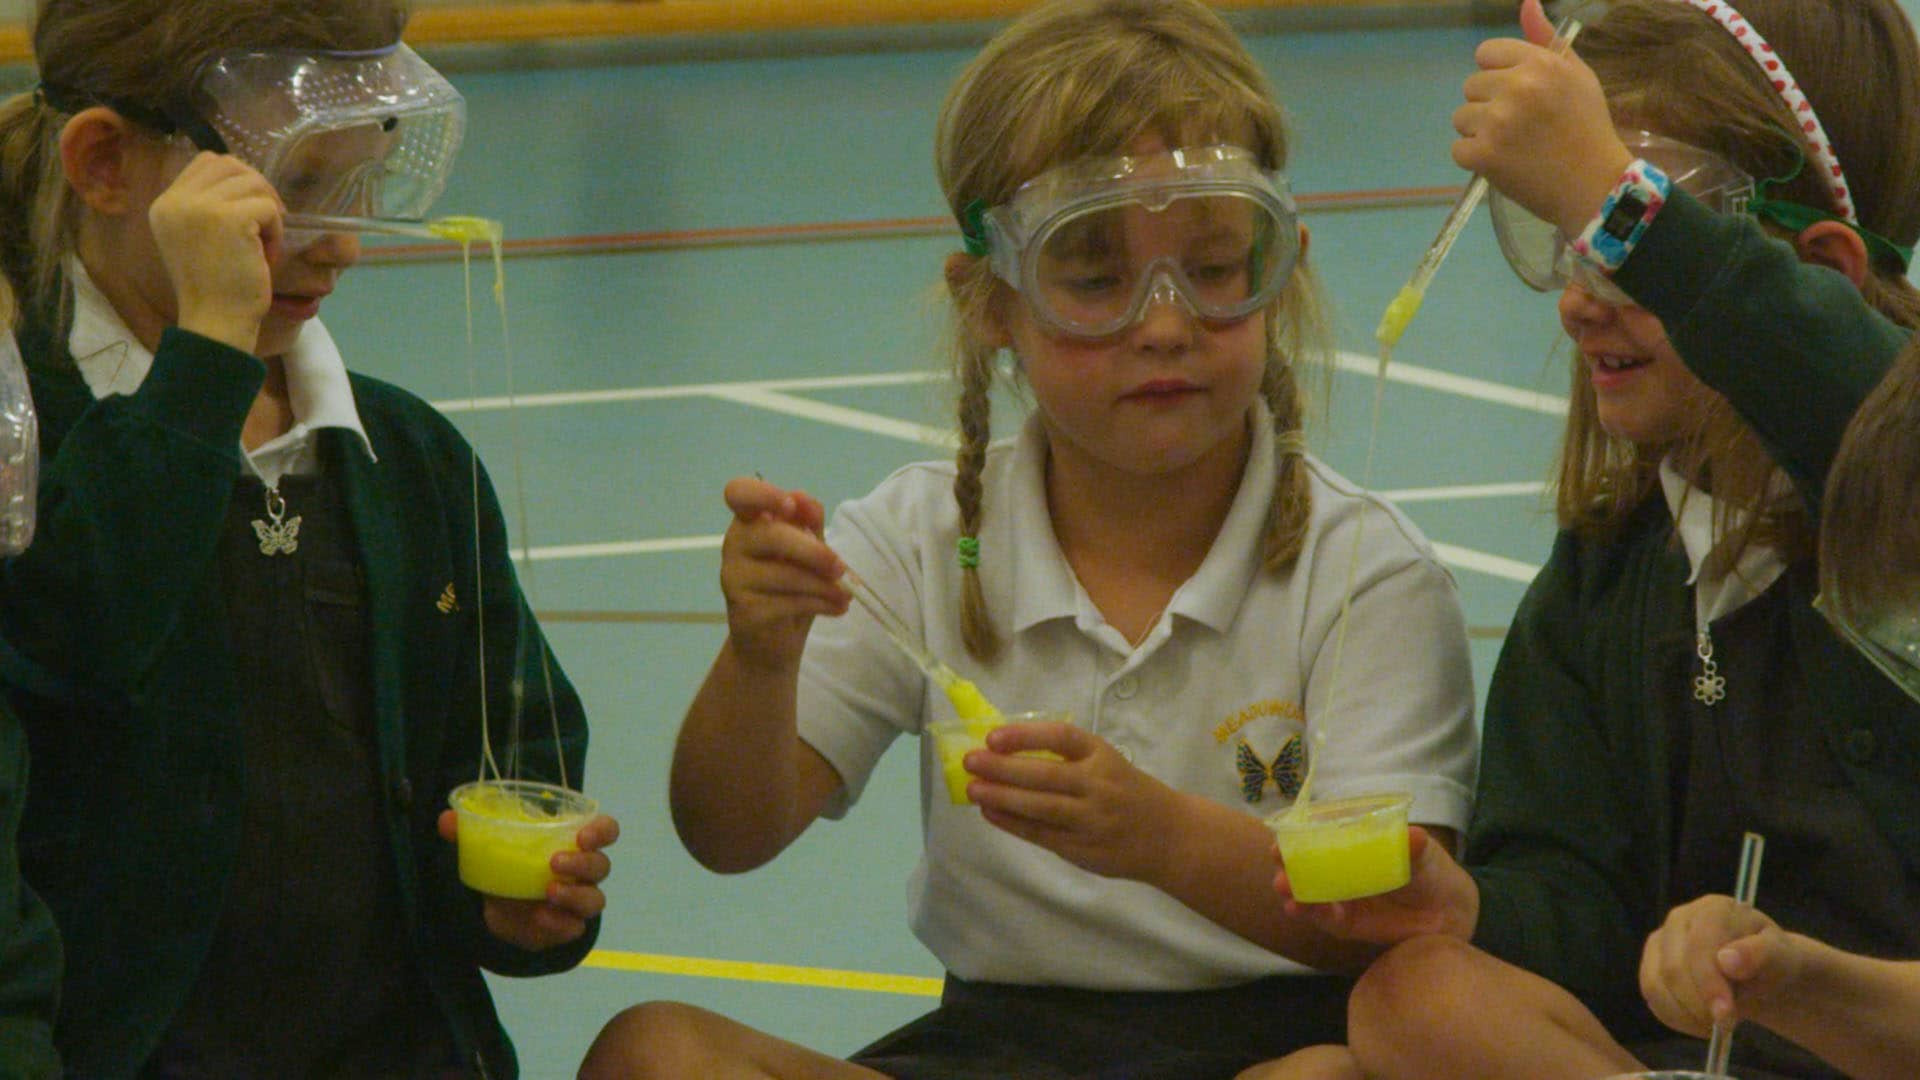 School children experimenting with science